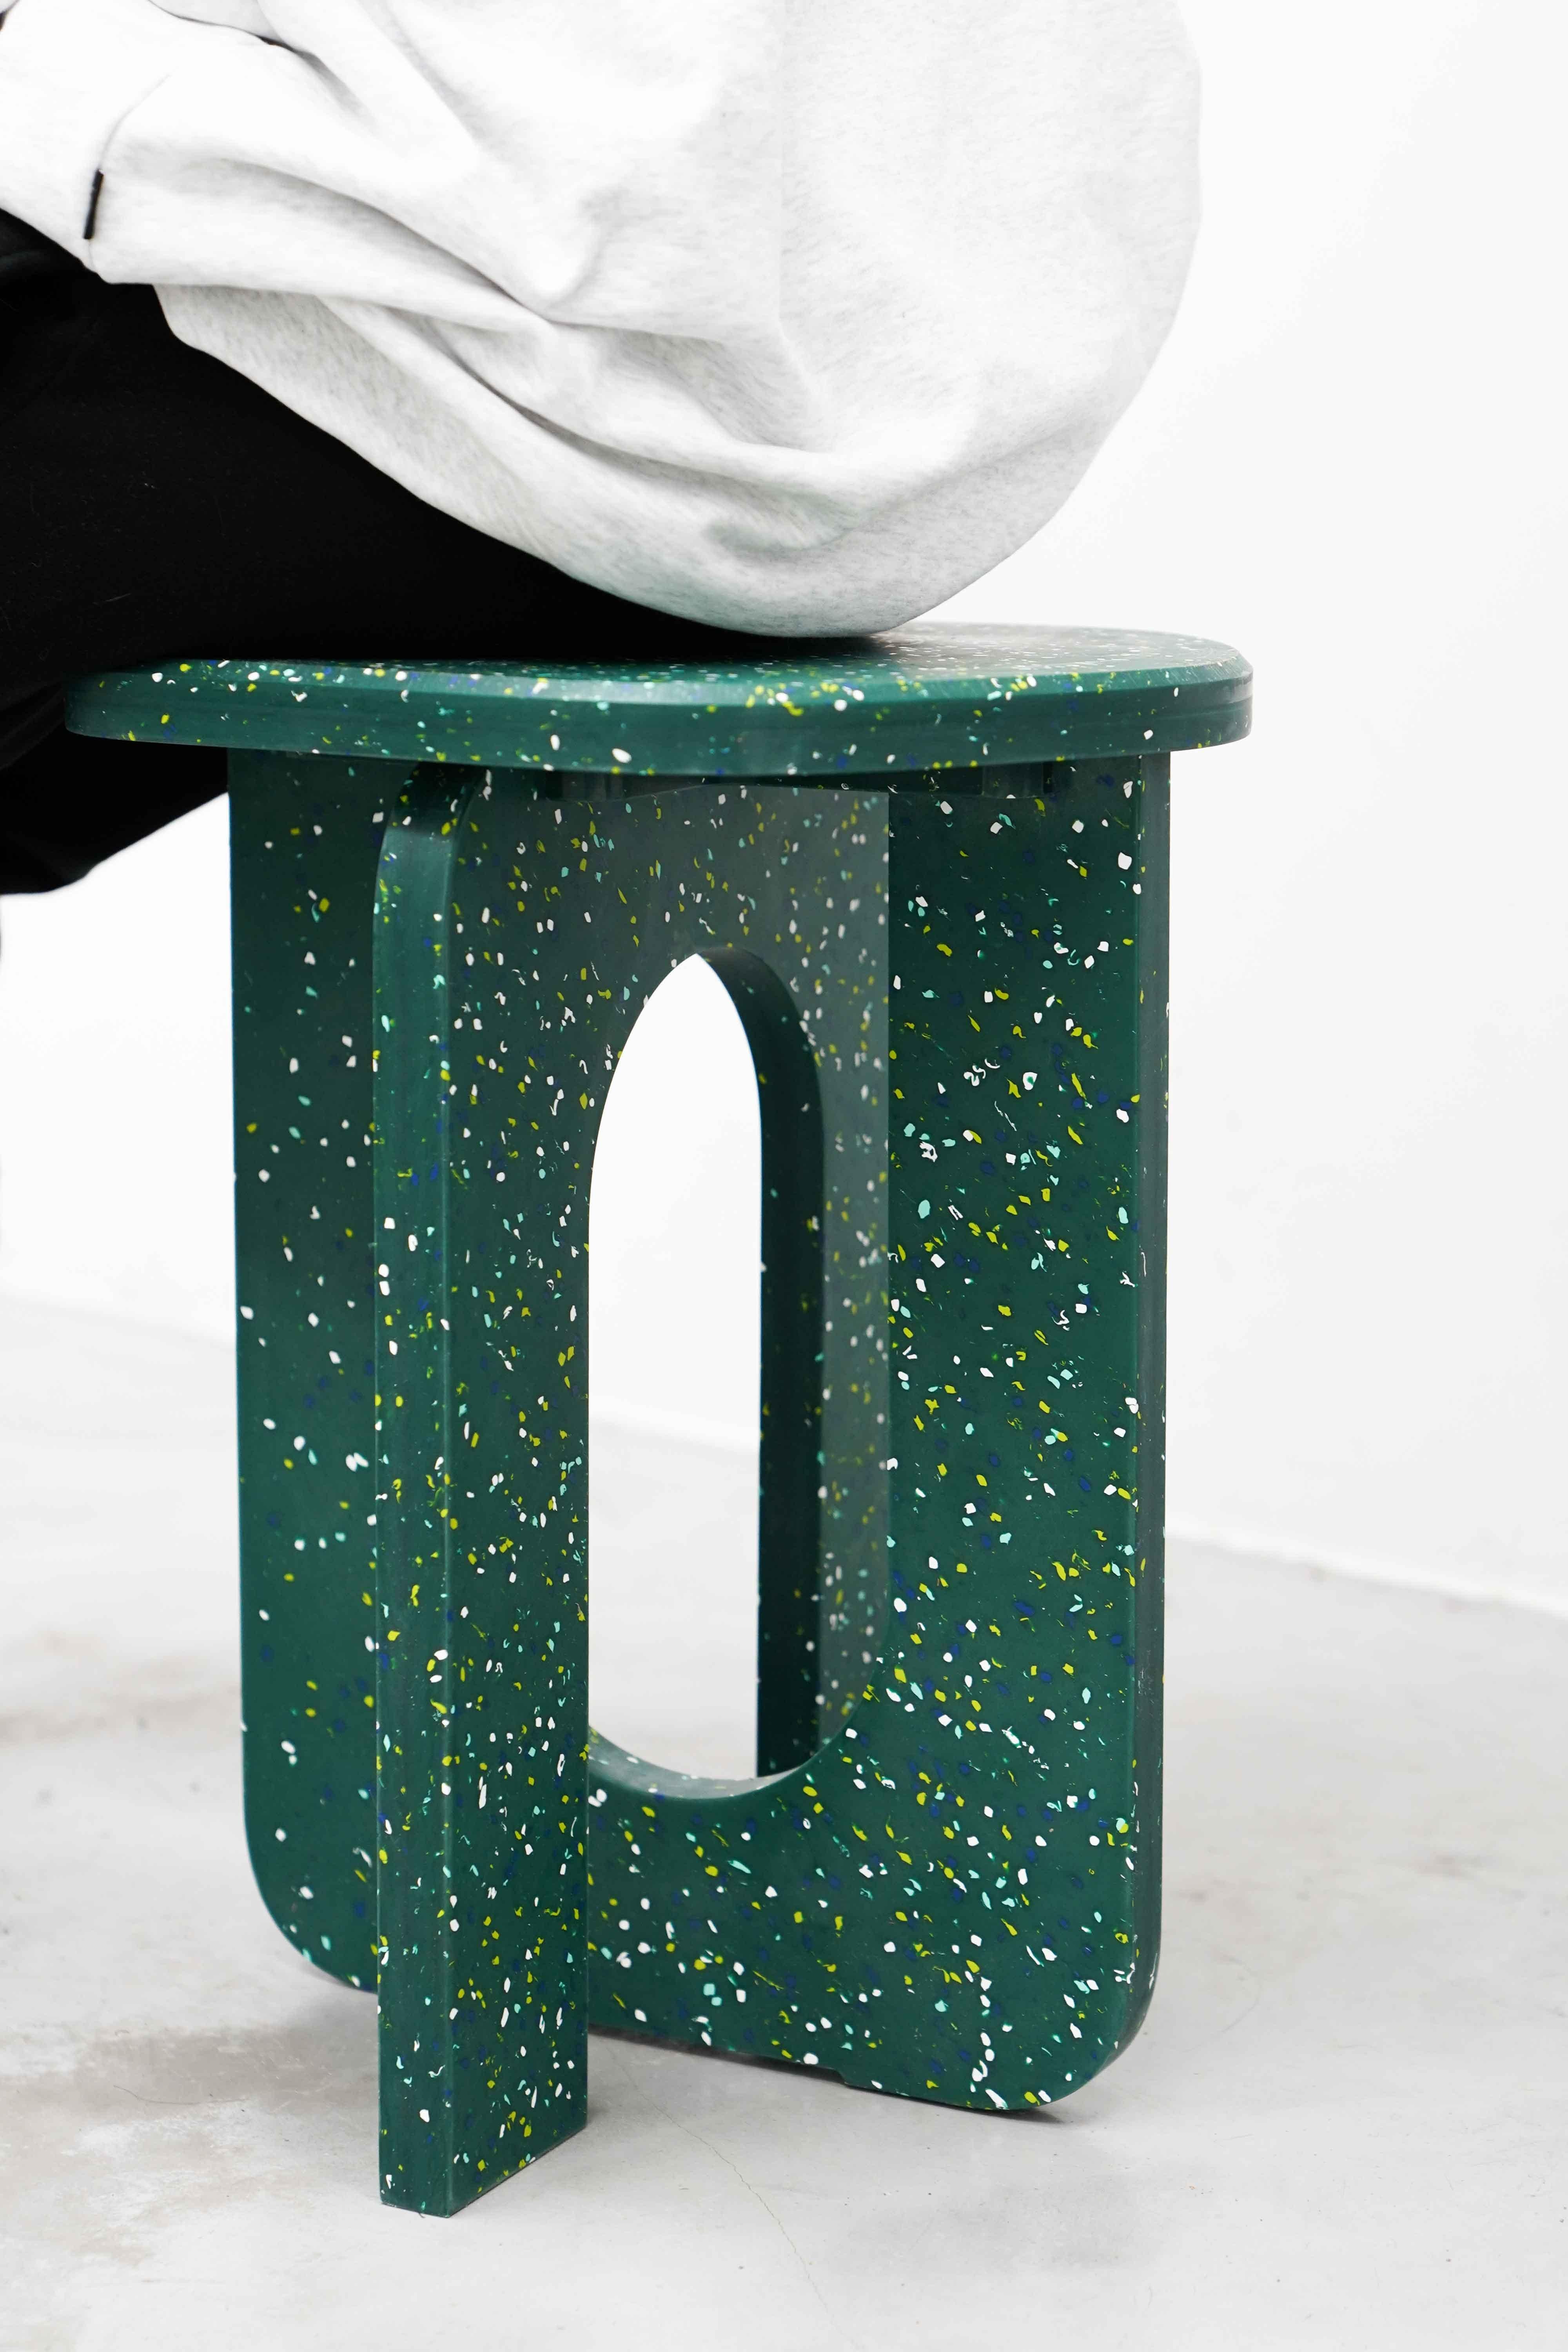 Pressed Modern Interpretation of Ancient Greek Style VECCA Stool by Lowlit Collective For Sale